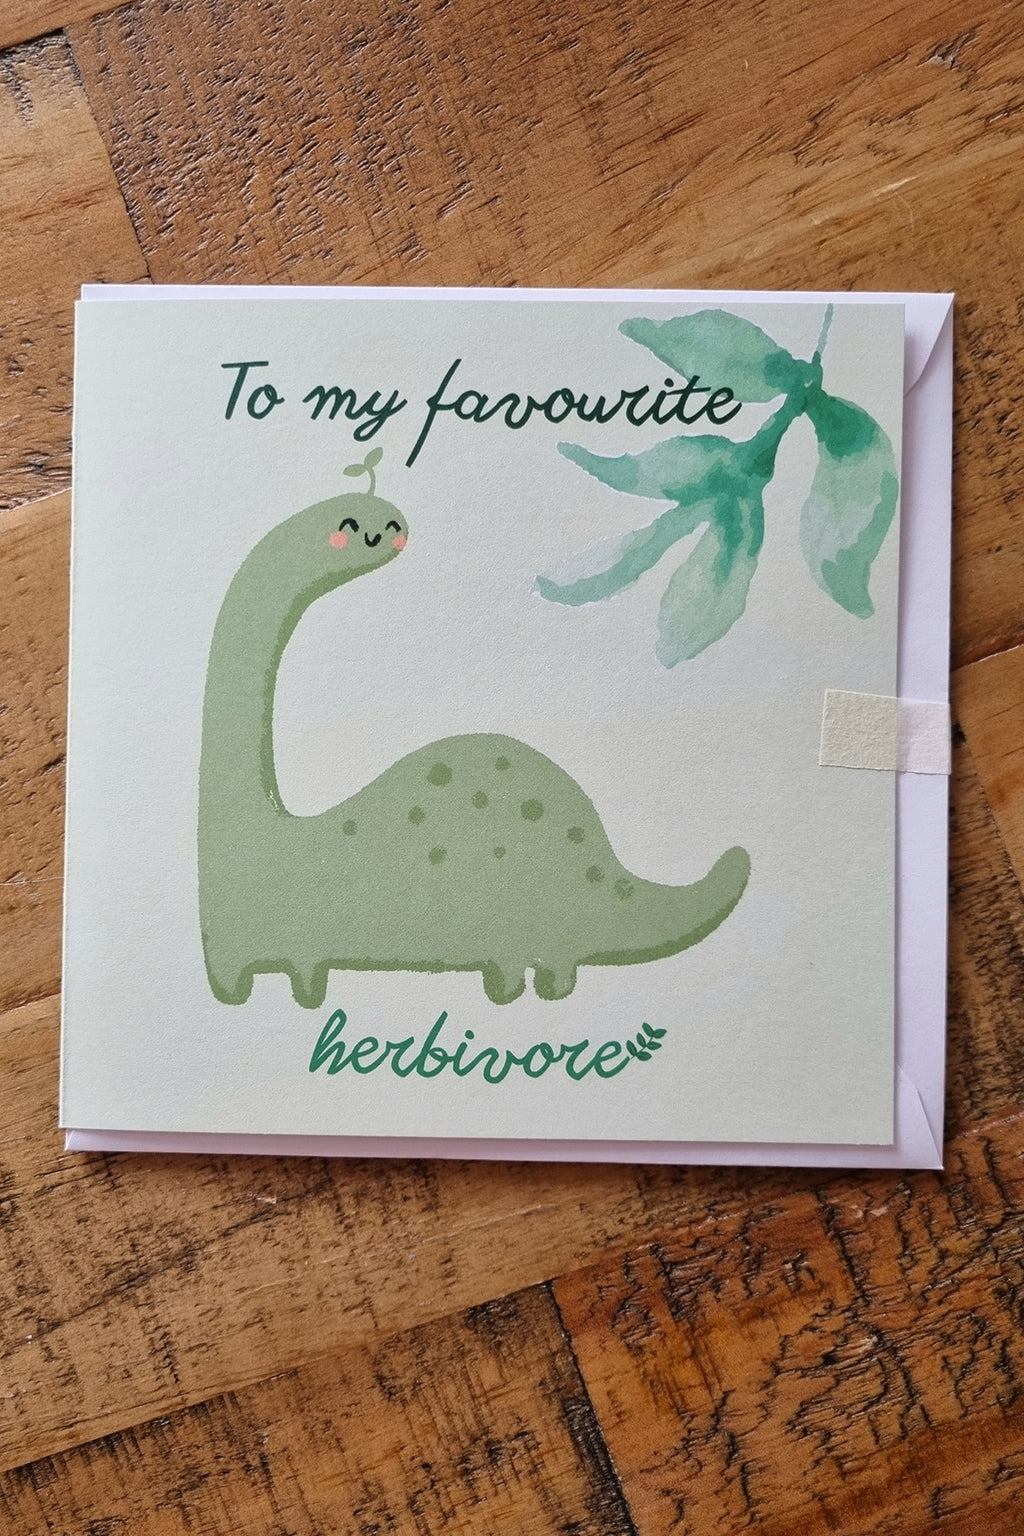 Want to send someone a little greeting? This vegan greeting card is guaranteed to make your favourite person smile.